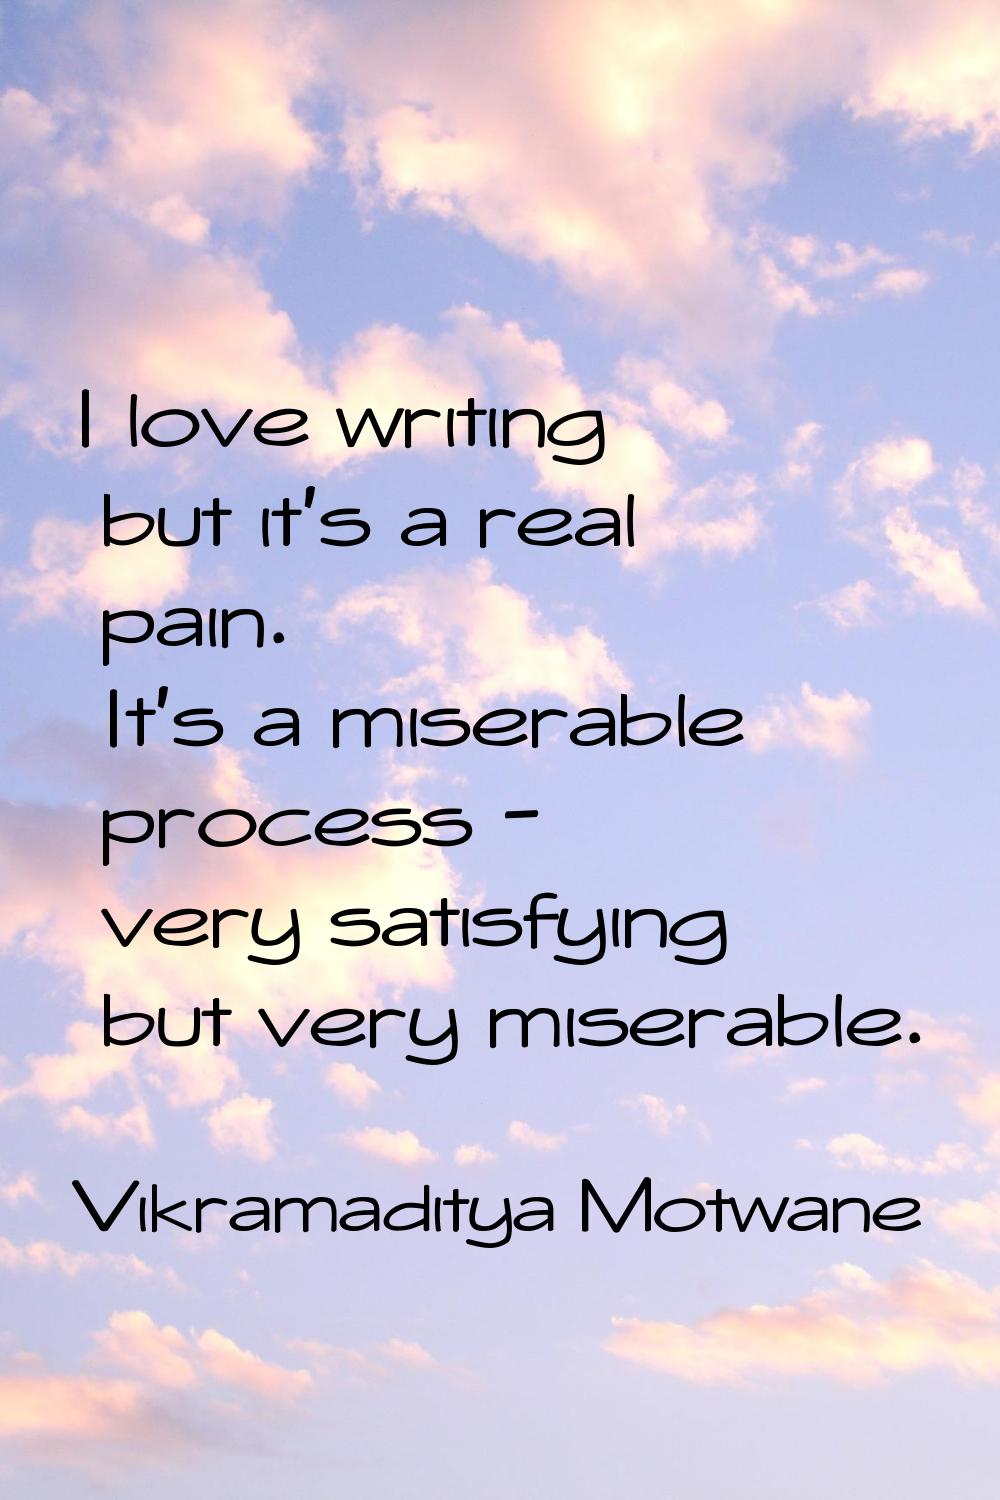 I love writing but it's a real pain. It's a miserable process - very satisfying but very miserable.